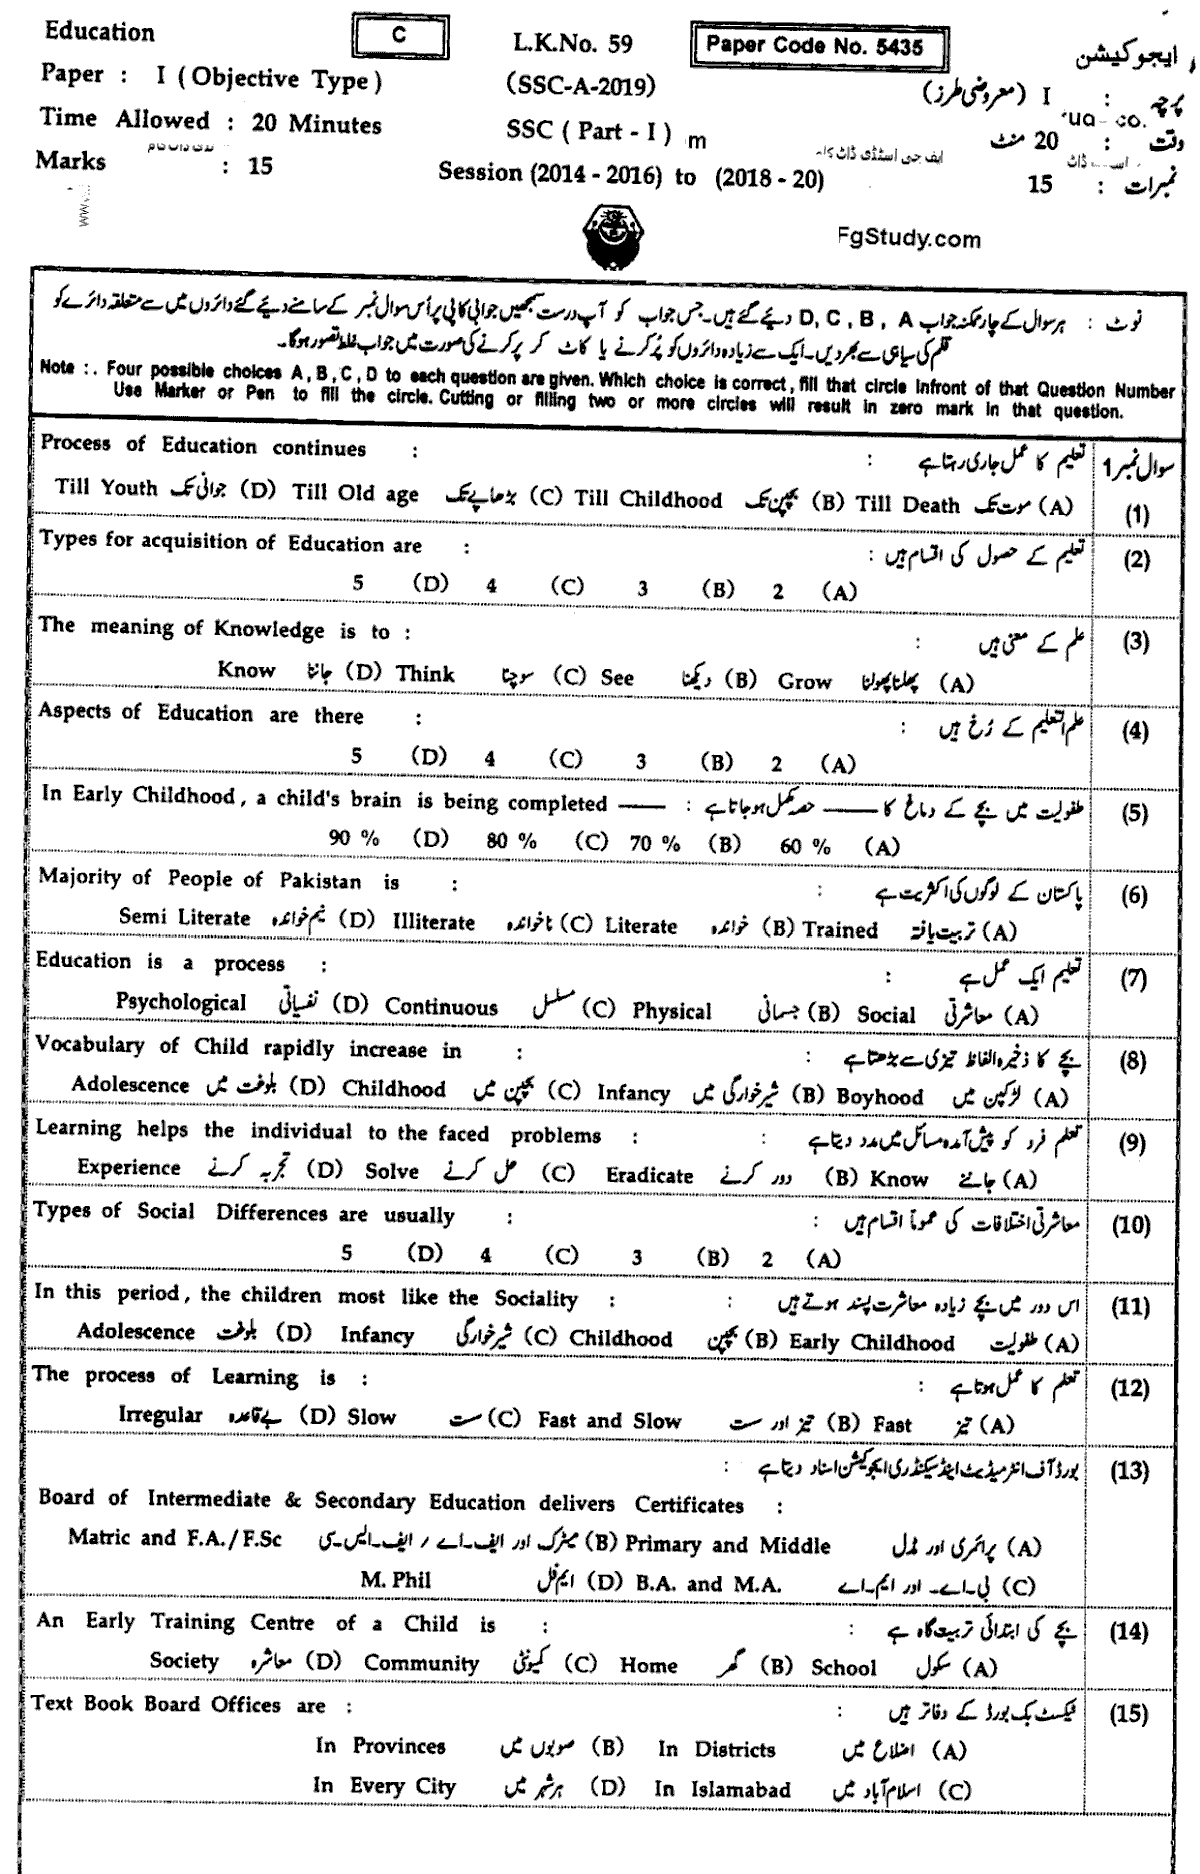 9th Class Education Past Paper 2019 Group 1 Objective Bahawalpur Board